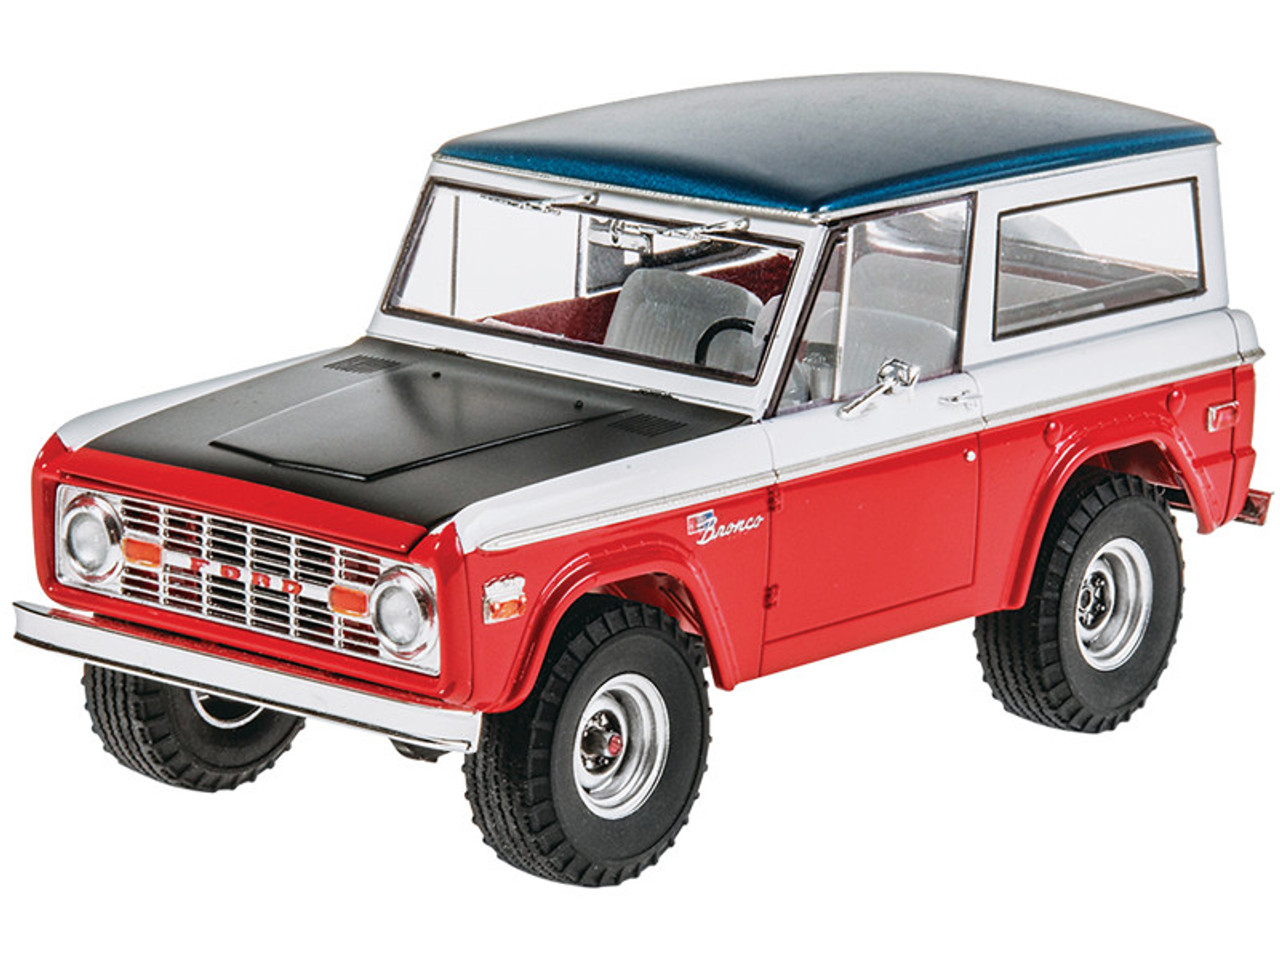 Level 5 Model Kit Ford Baja Bronco "Bill Stroppe and Associates" 1/25 Scale Model by Revell